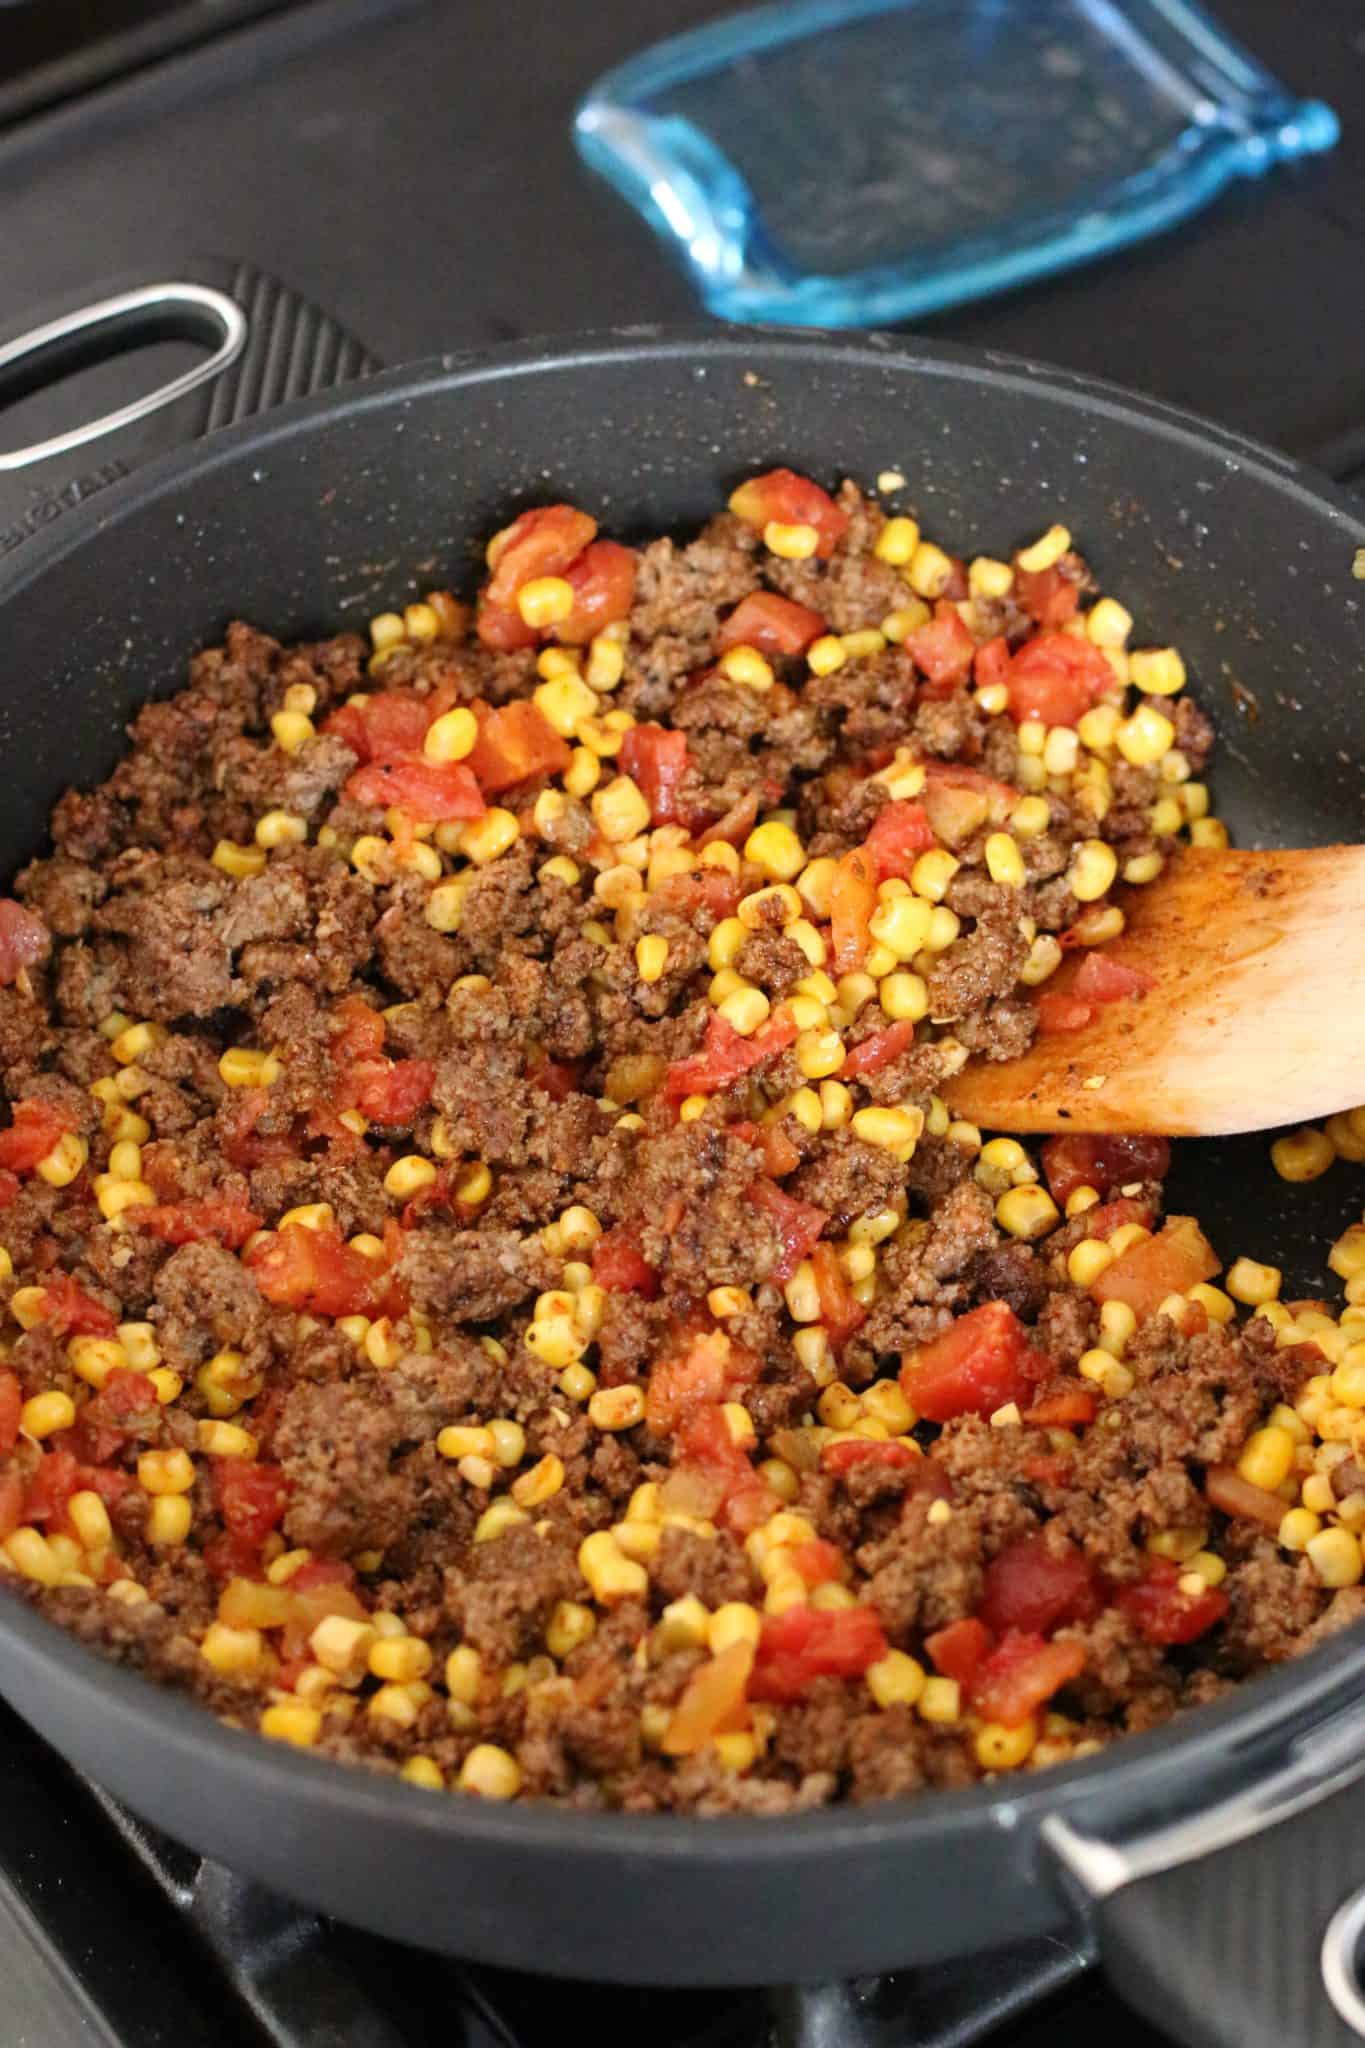 mexicorn and Rotel brand tomatoes added cooked ground beef mixture in large skillet.